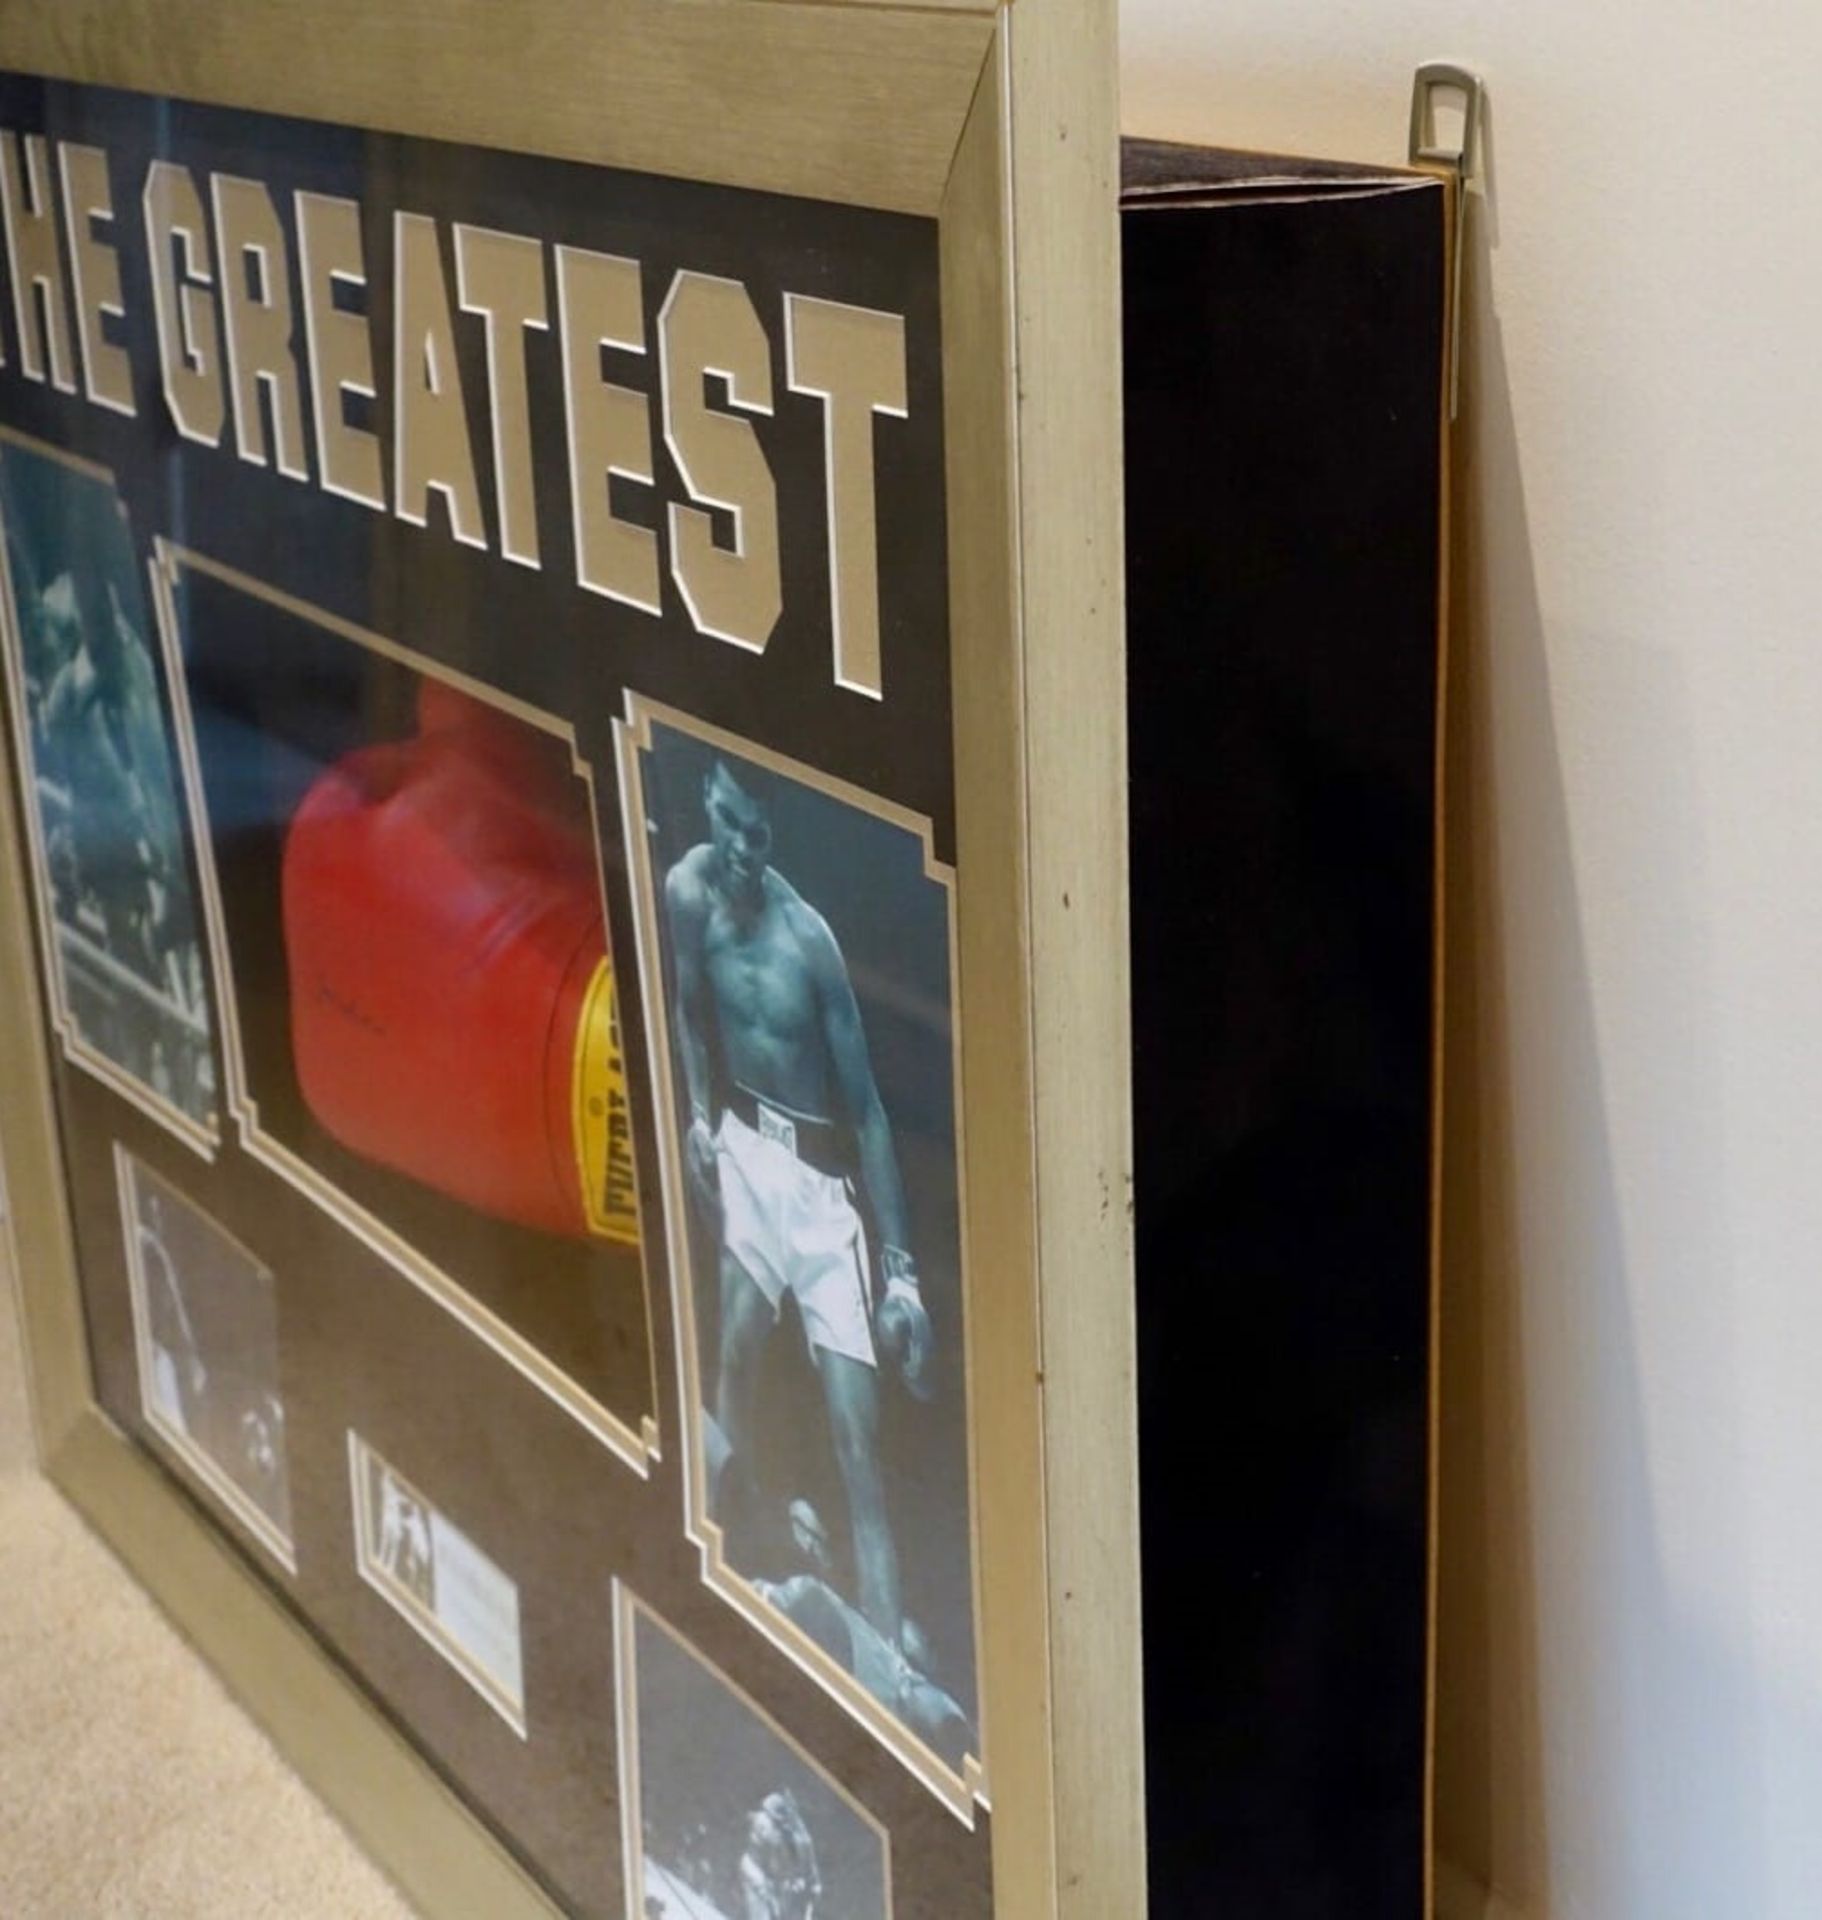 1 x Signed Muhammad Ali Boxing Glove - Mounted in Framed Display Case With Certificate of - Image 5 of 5